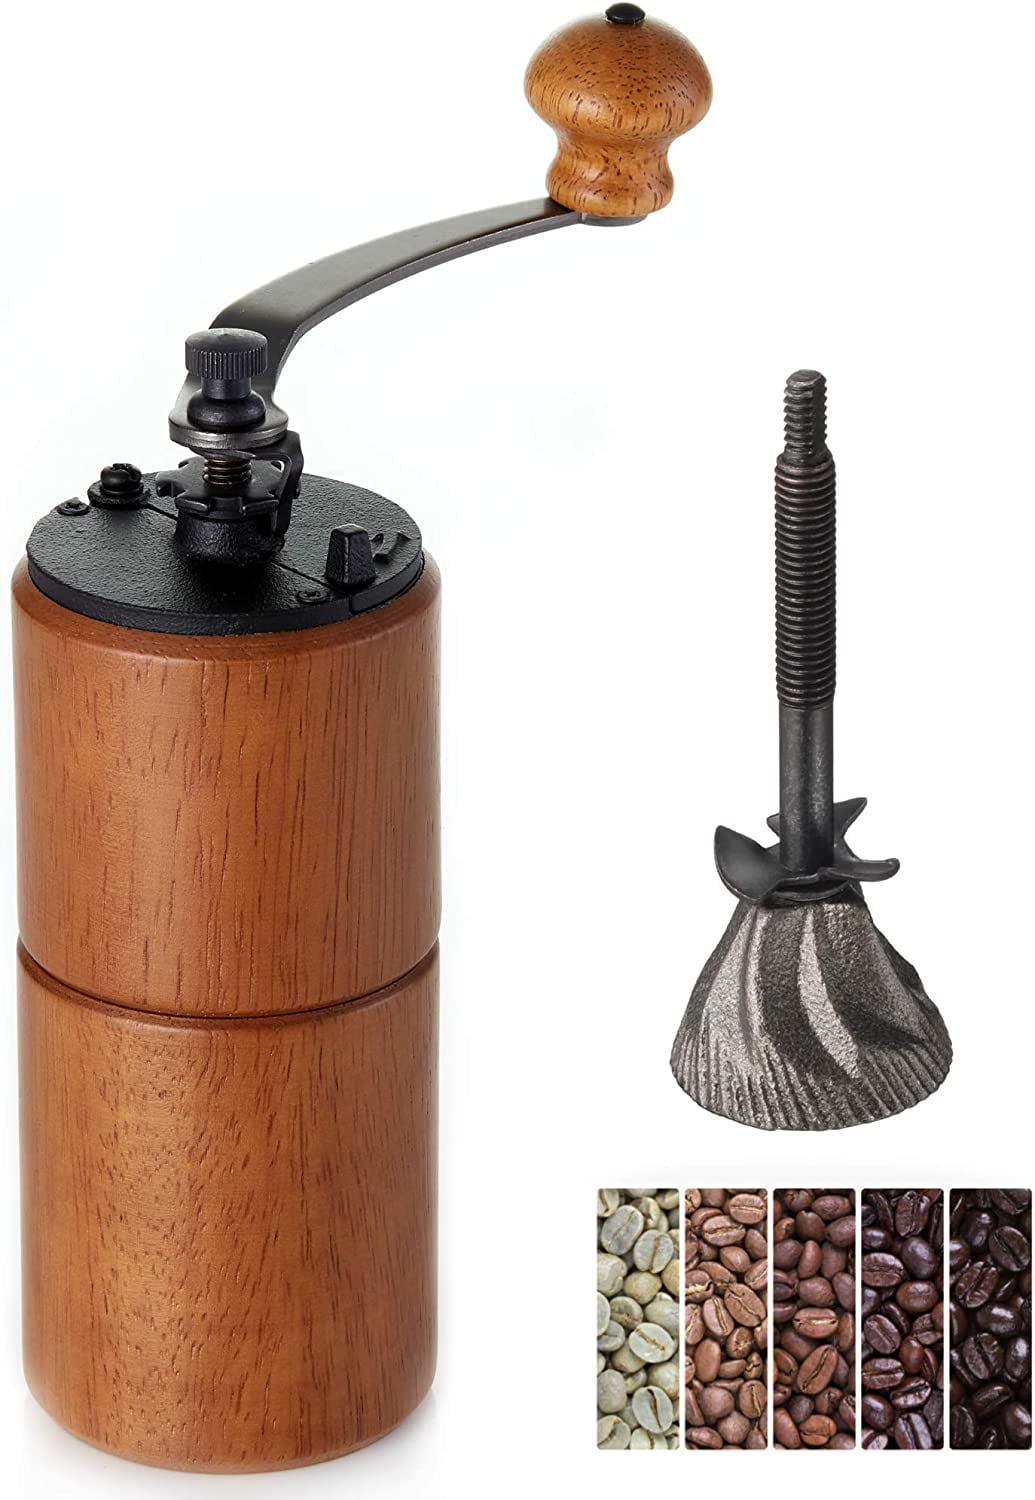 Niyofa Manual Coffee Grinder with Ceramic Burrs Hand Coffee Mill Portable Coffee Bean Grinder Hand Crank Coffee Mill for Home Office Travelling